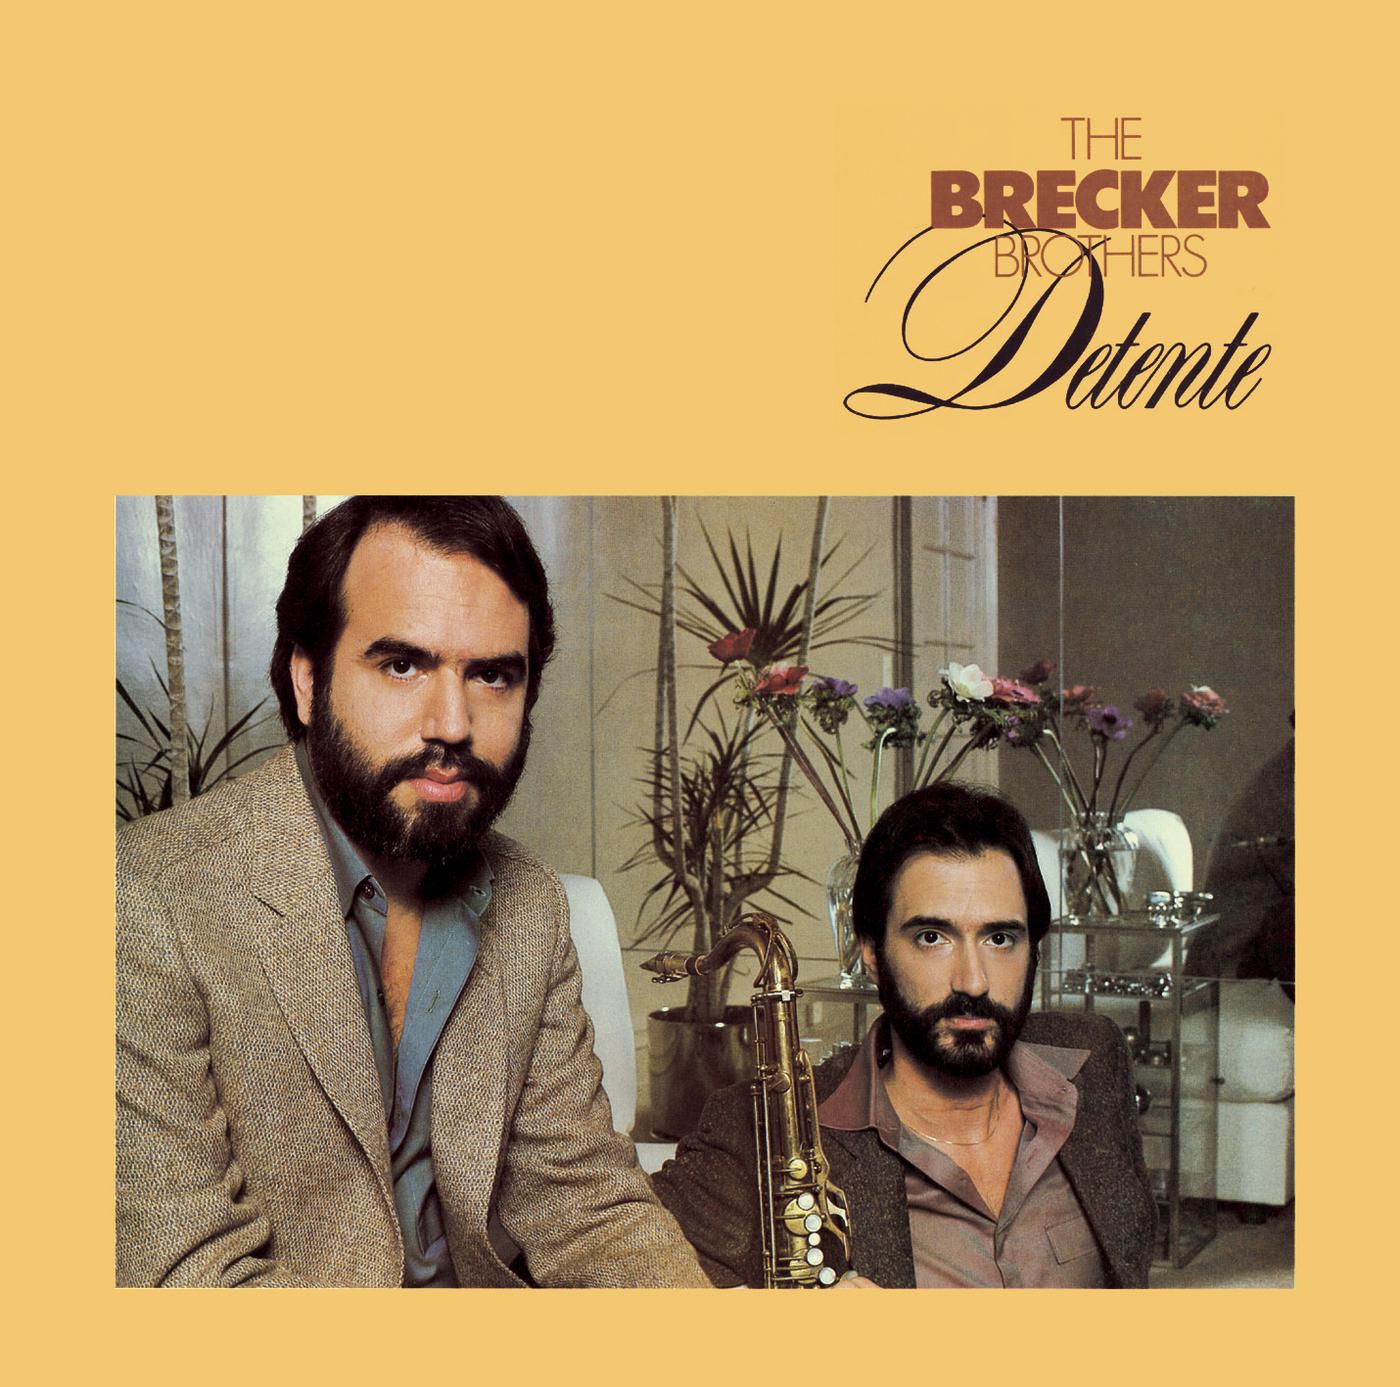 The Brecker Brothers - Baffled